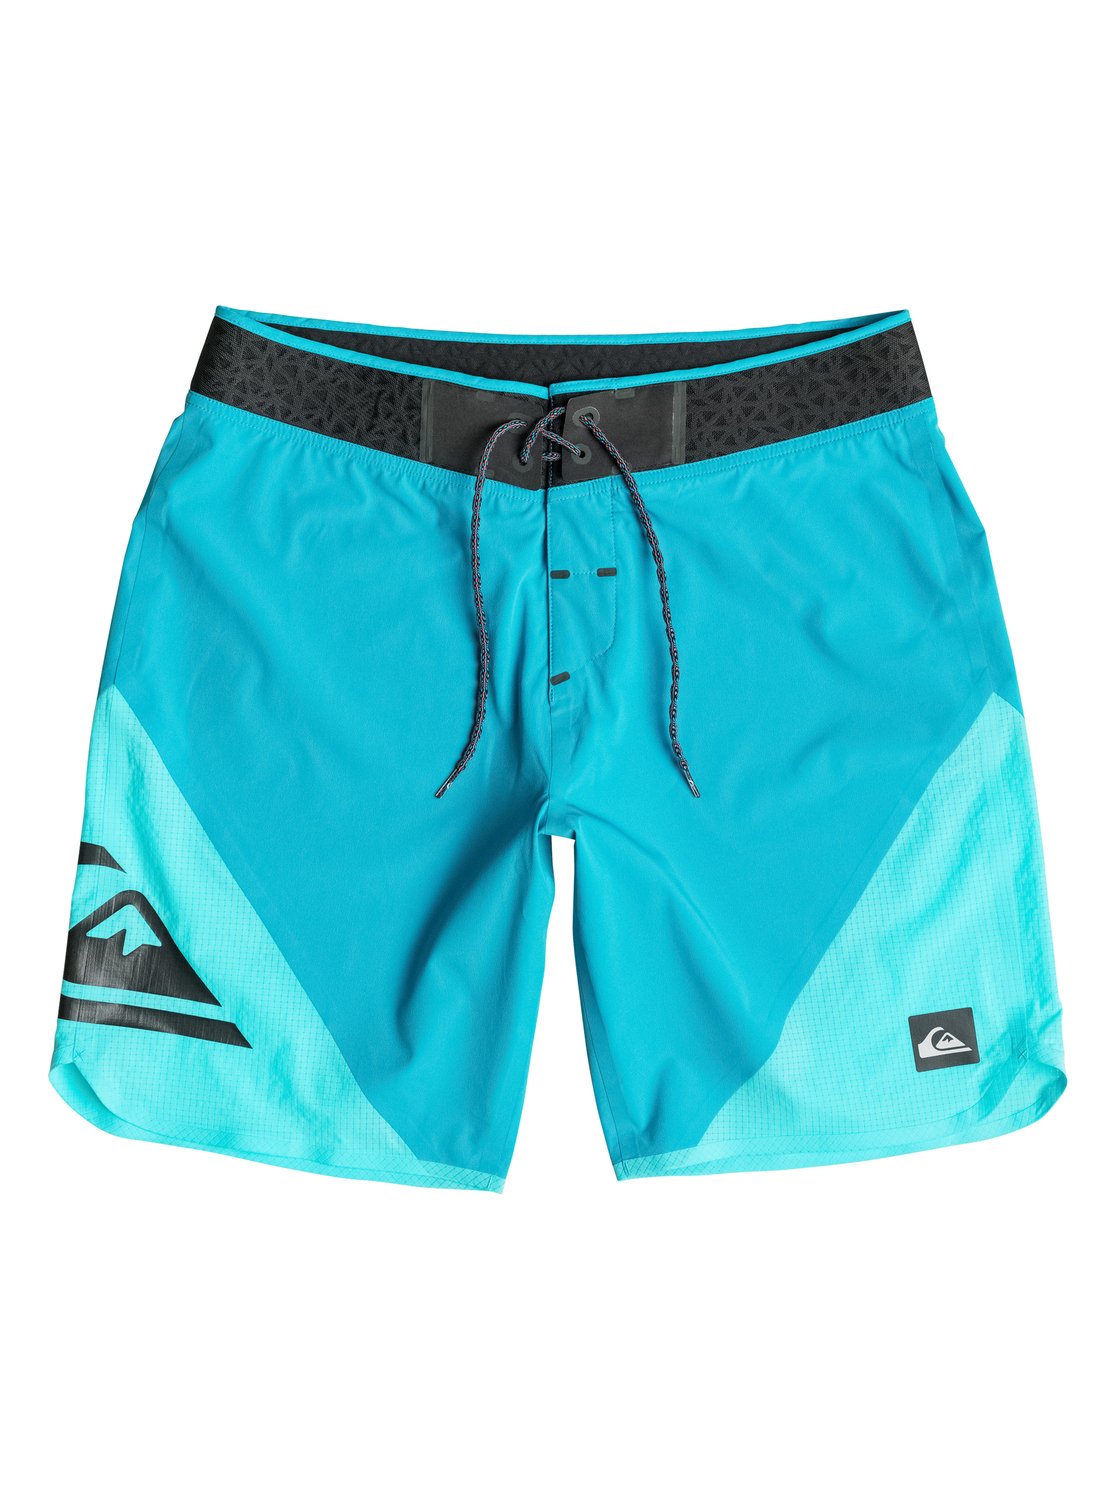 New Wave High 19 - Board Shorts - Quiksilver - Quiksilver<br>